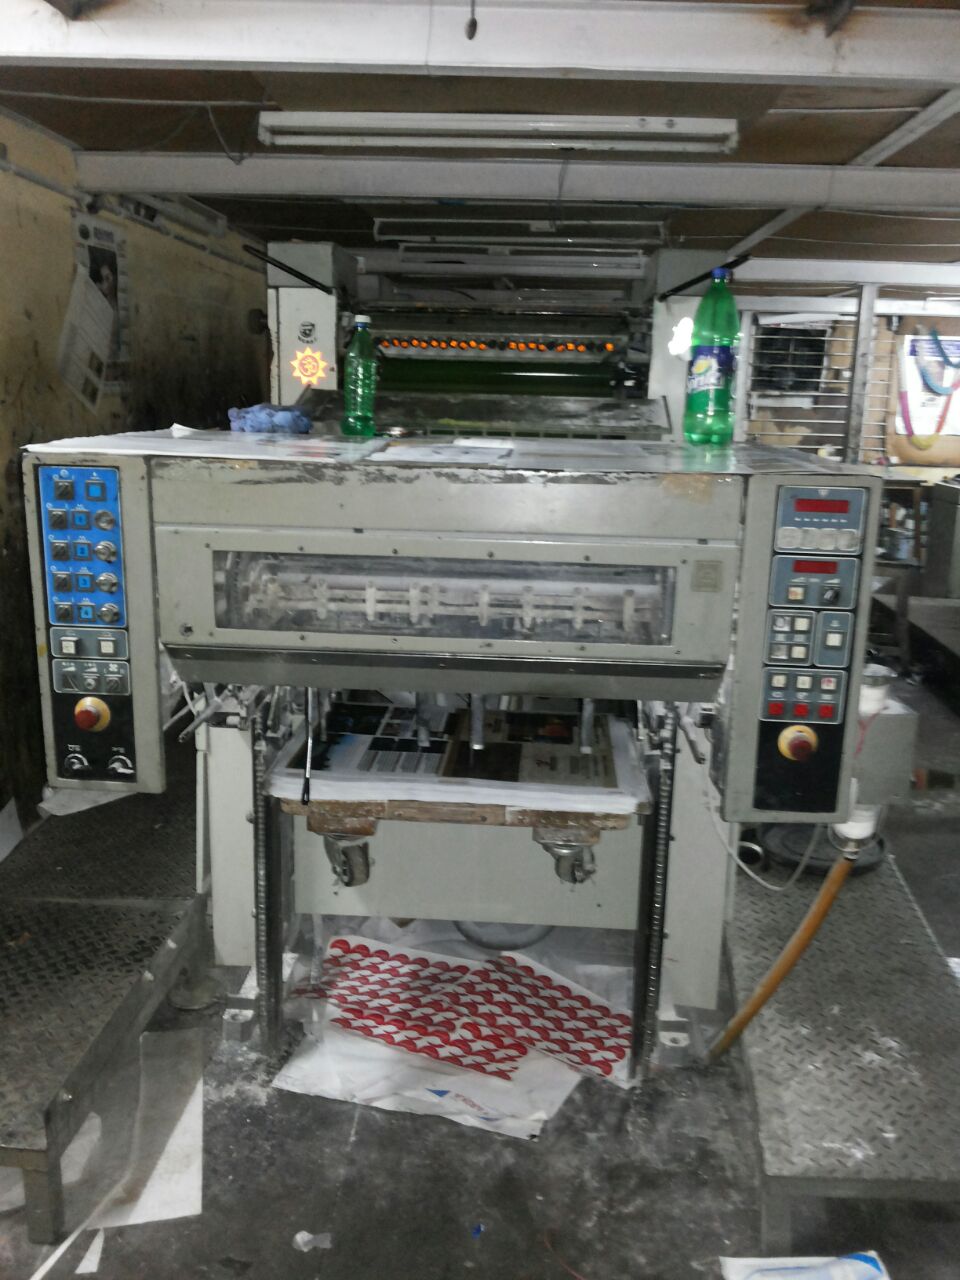 Adast Dominant-745 Sheet Fed / Offset Used Machinery for sale